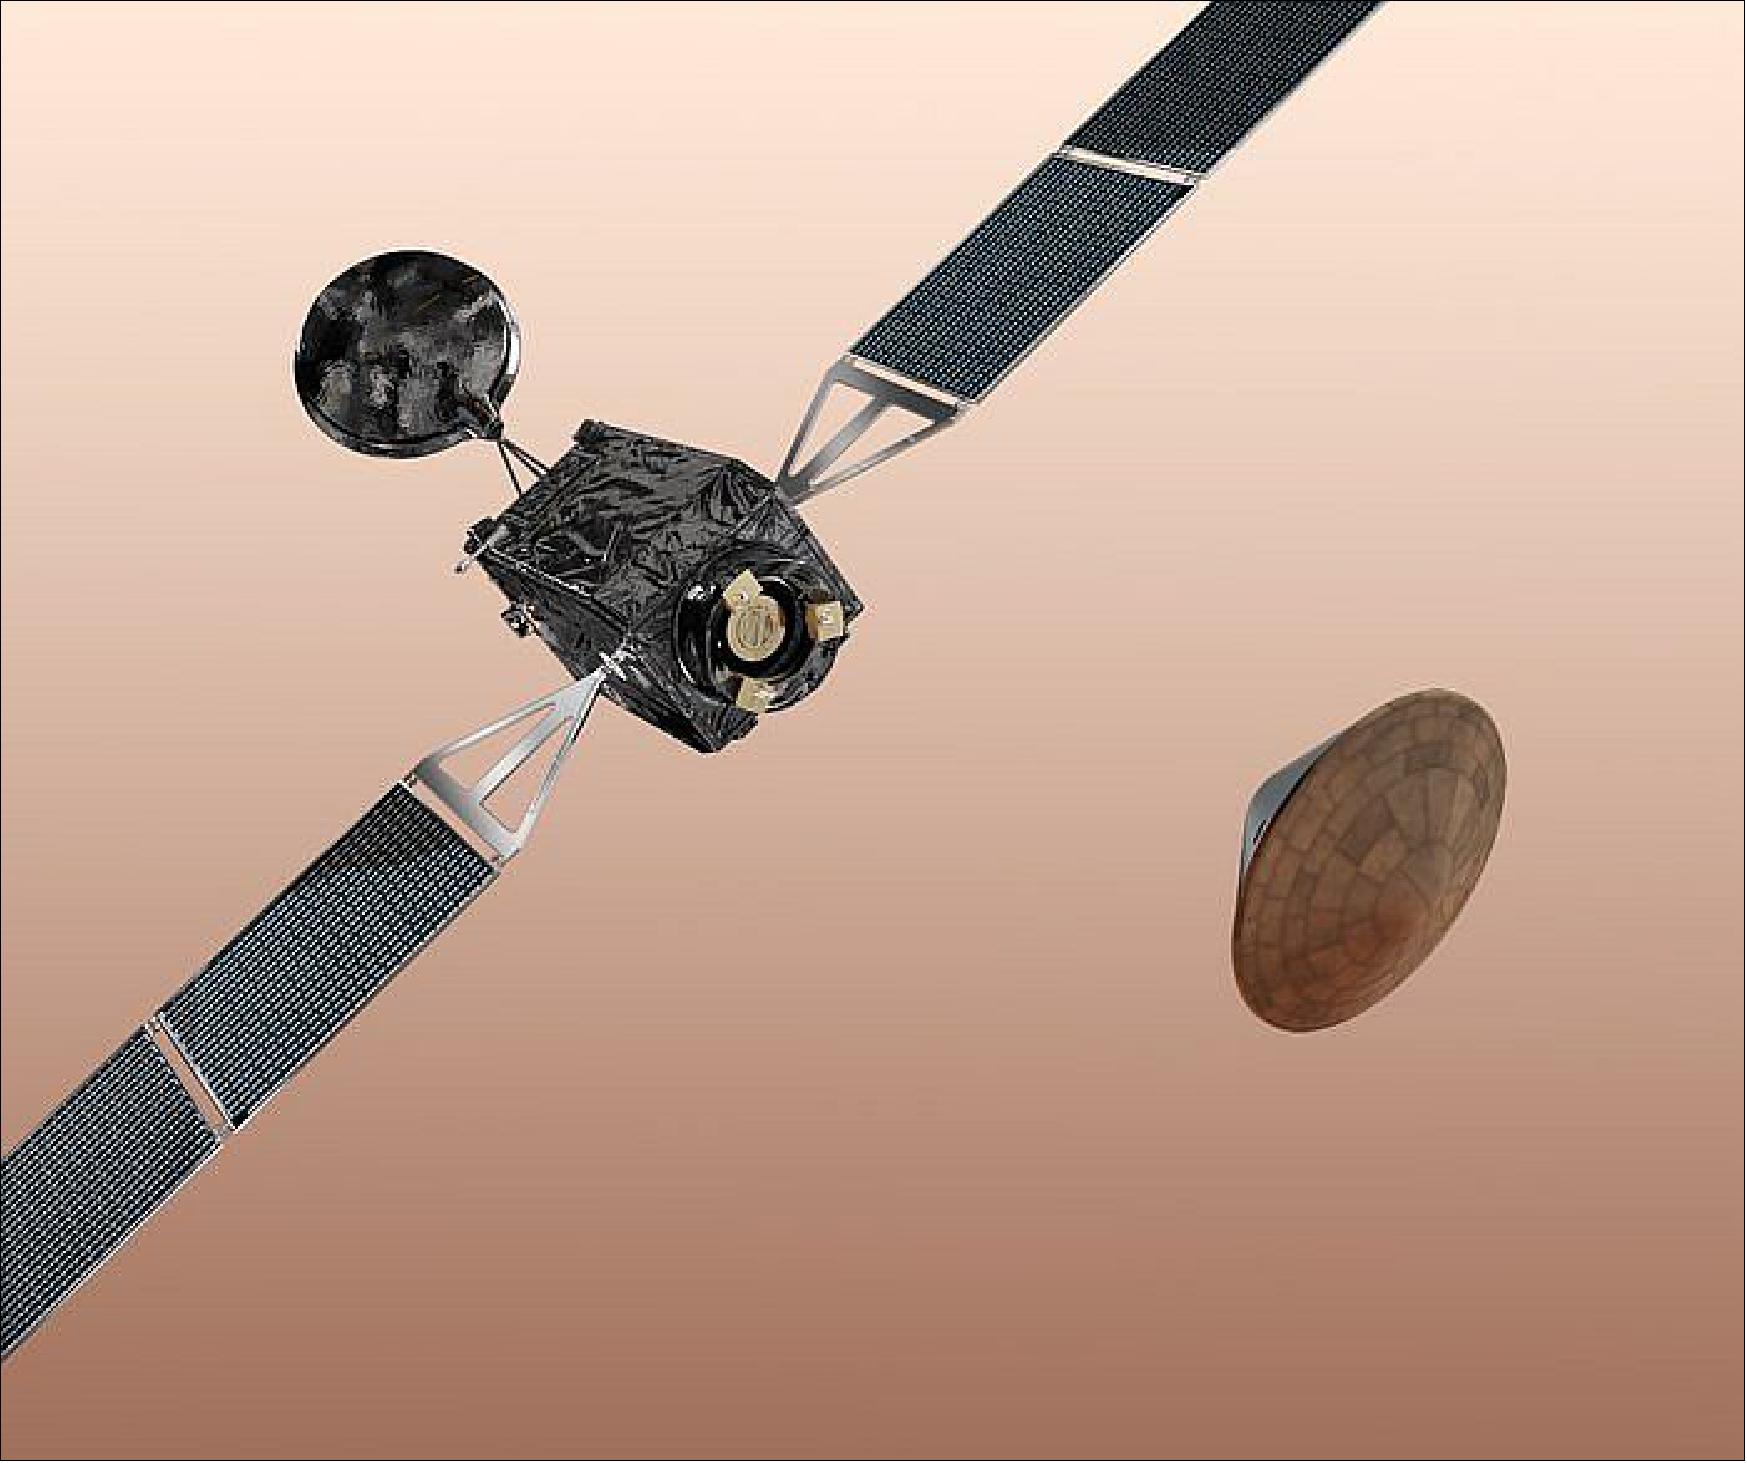 Figure 149: Artist's rendition showing the Schiaparelli Rover release from the TGO (Trace Gas Orbiter) for a landing on the surface of Mars (image credit: ESA)